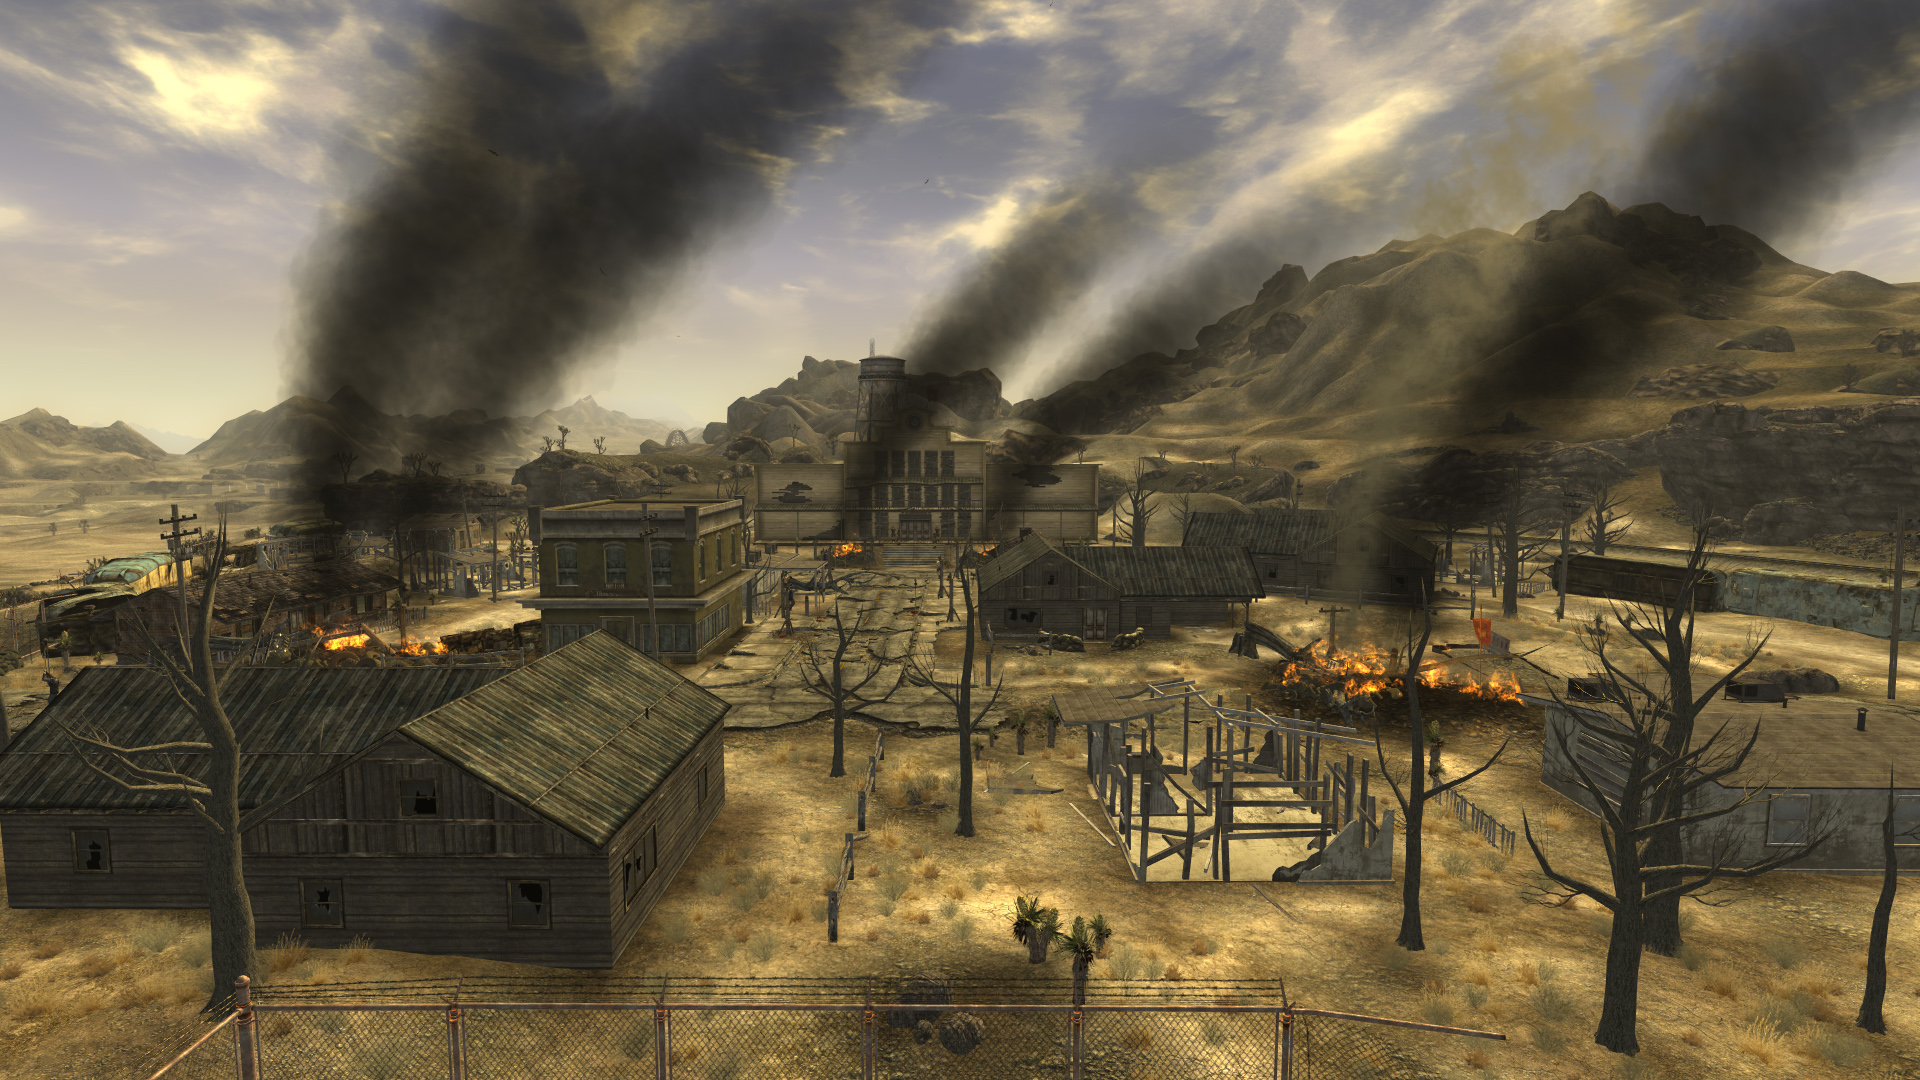 Want to get to new Vegas safely level 1? Just follow the blue line from  Sloan to Neils shack, then head north around the outer canyons to the NCR  shack to get